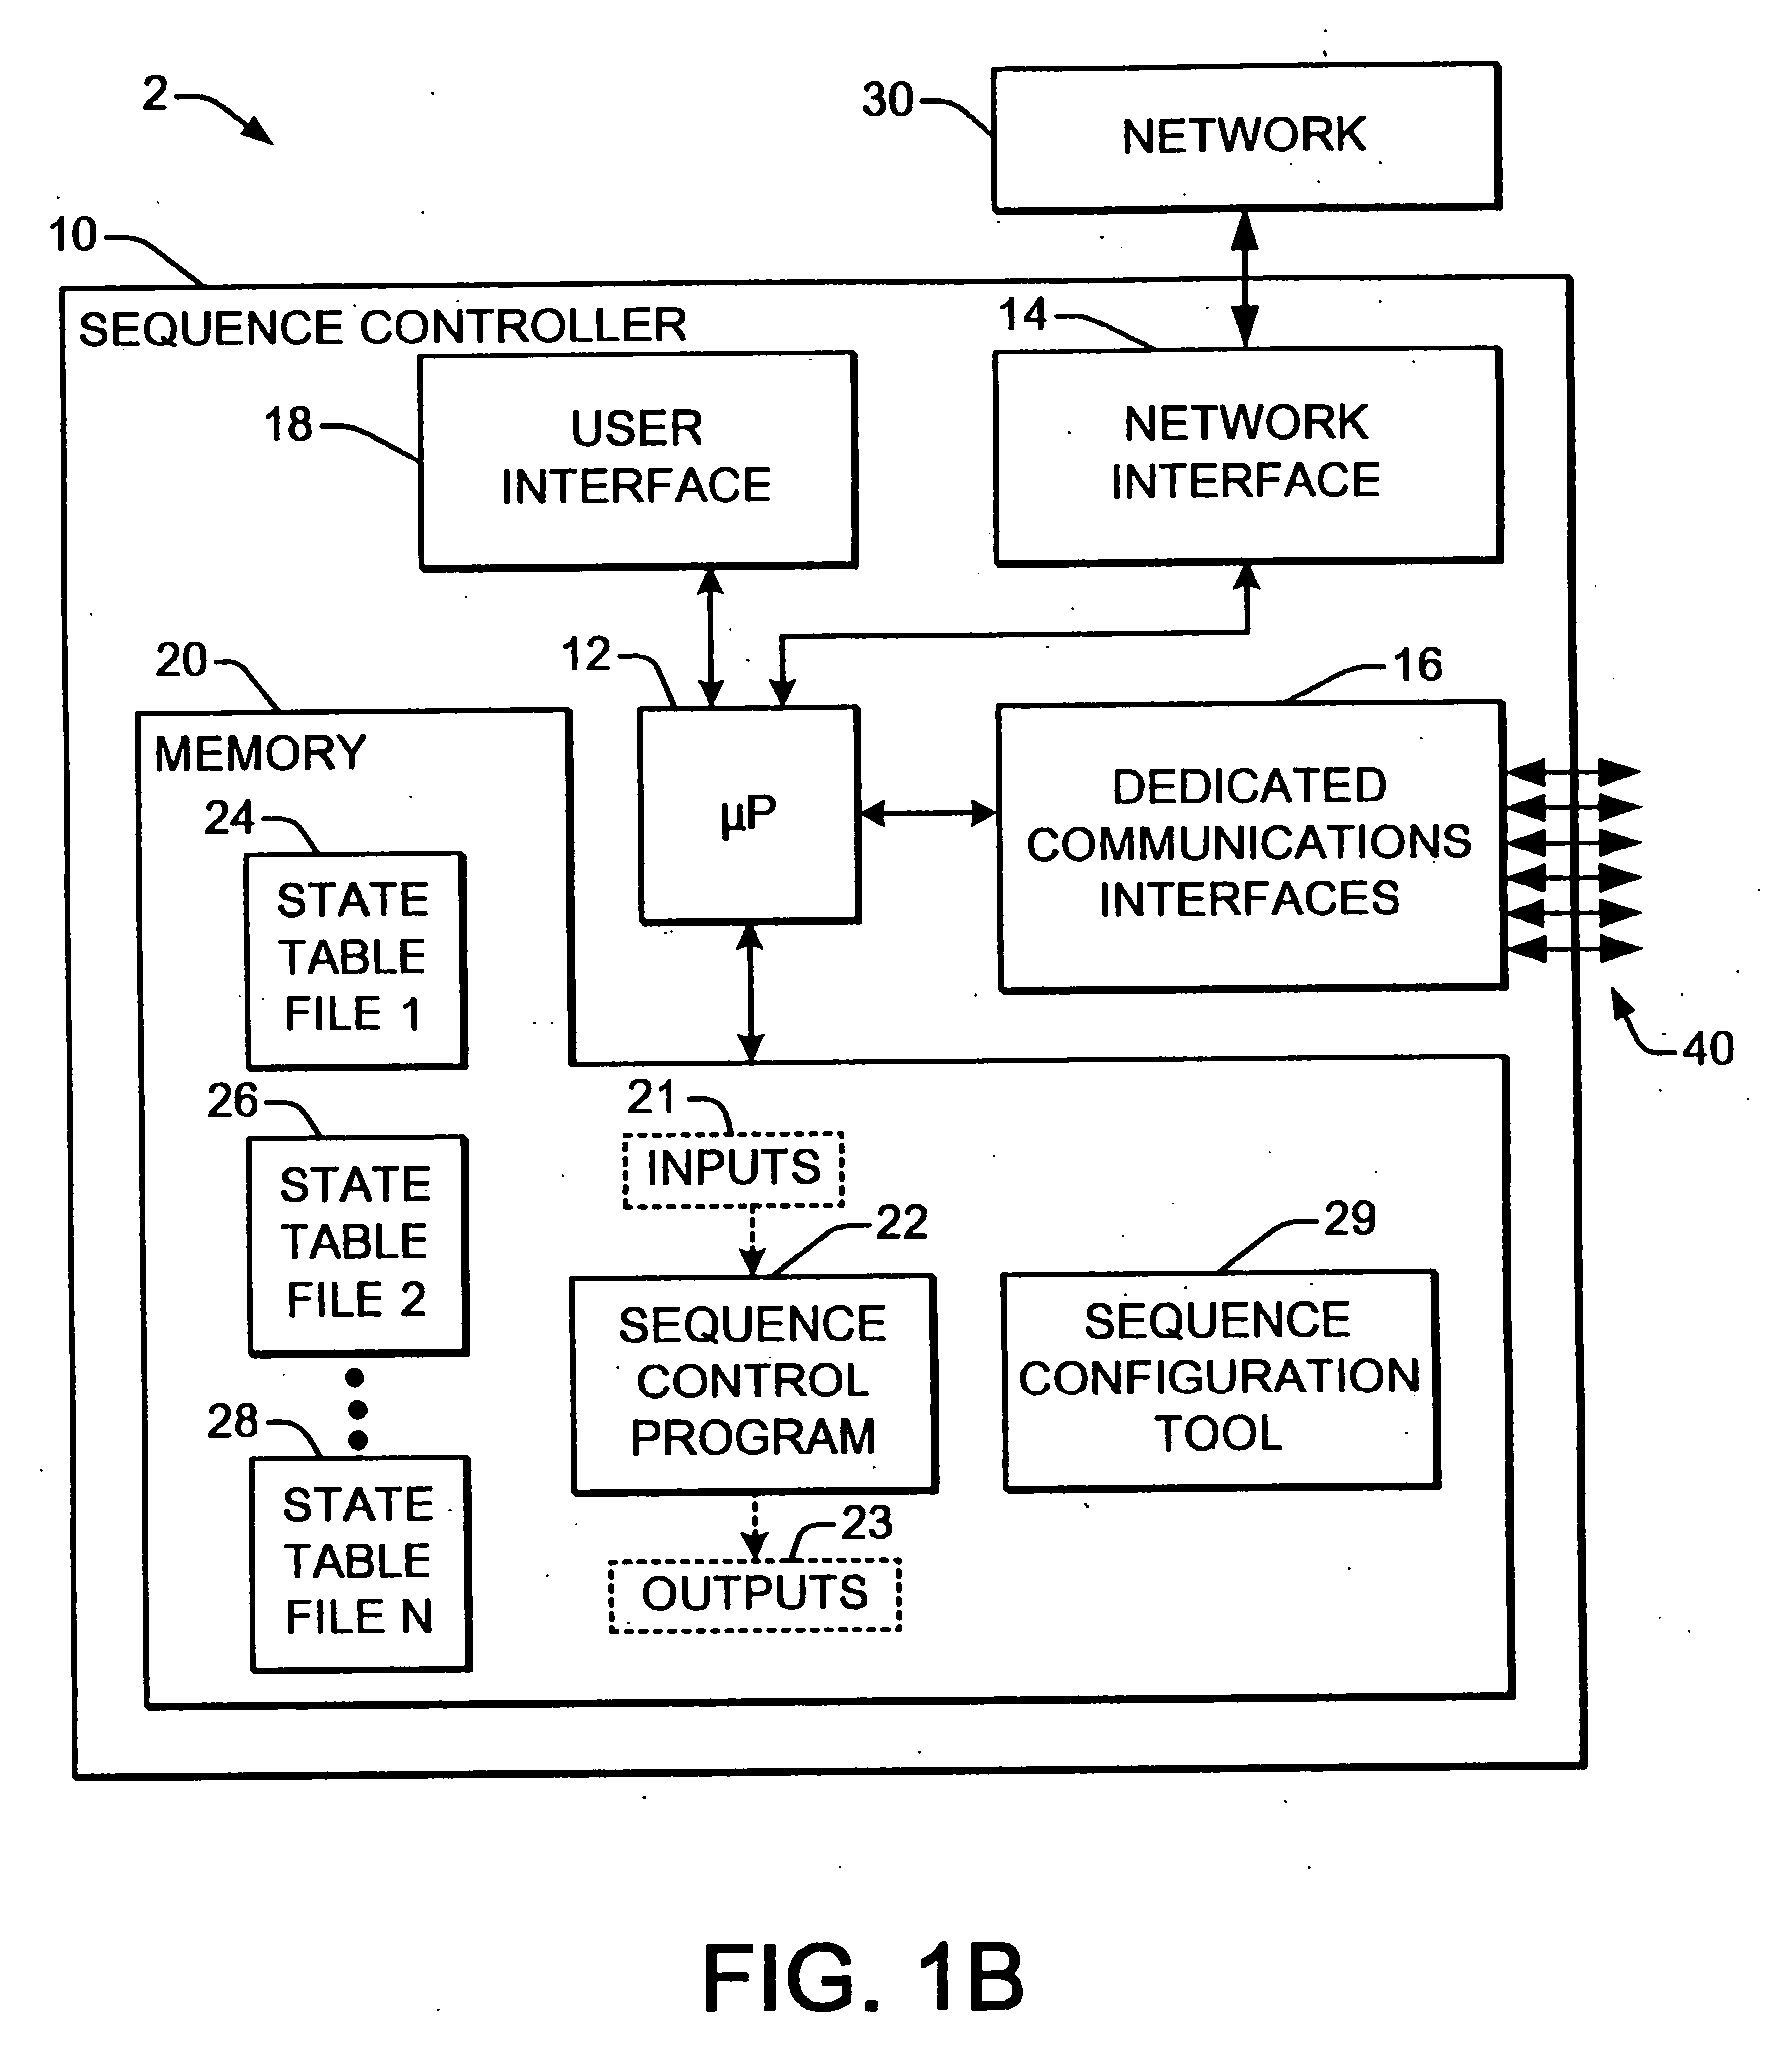 Welding system sequence control apparatus